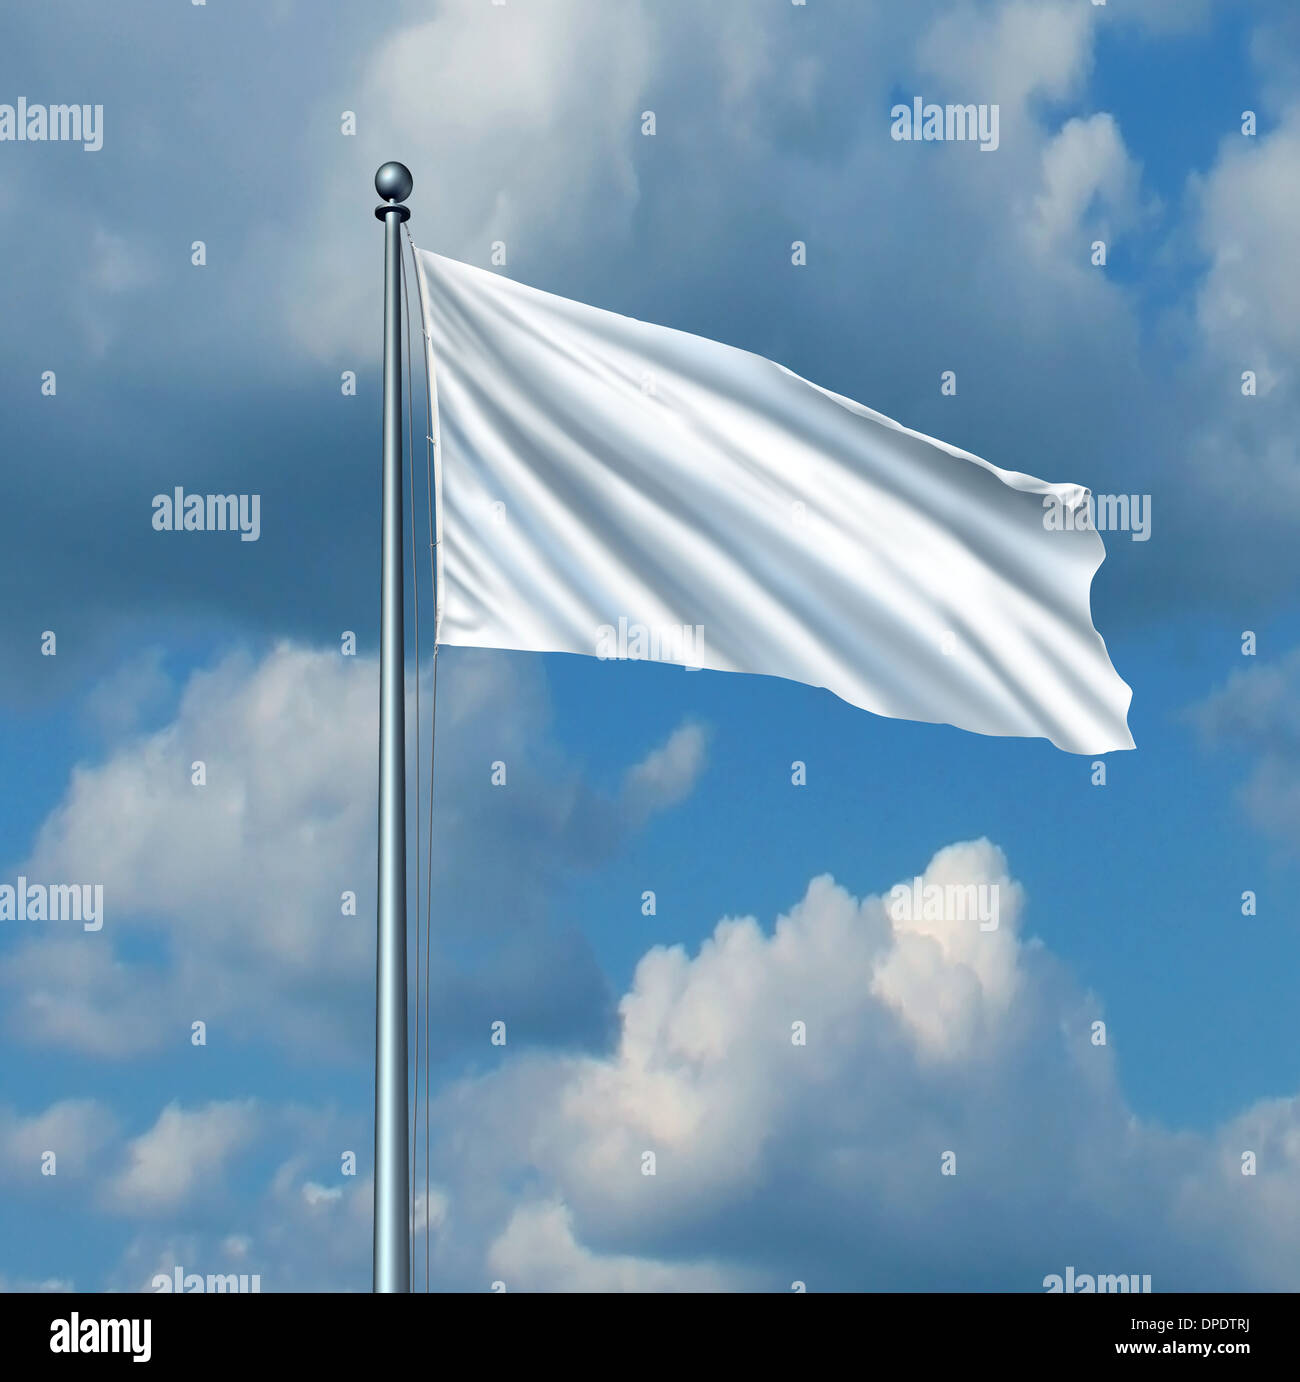 White flag surrender symbol as a metaphor for retreat in business and new start with a blank wavy cloth on a flagpole on a windy blue sky as an icon of giving up the fight with copy space for a promotion or advertising message. Stock Photo